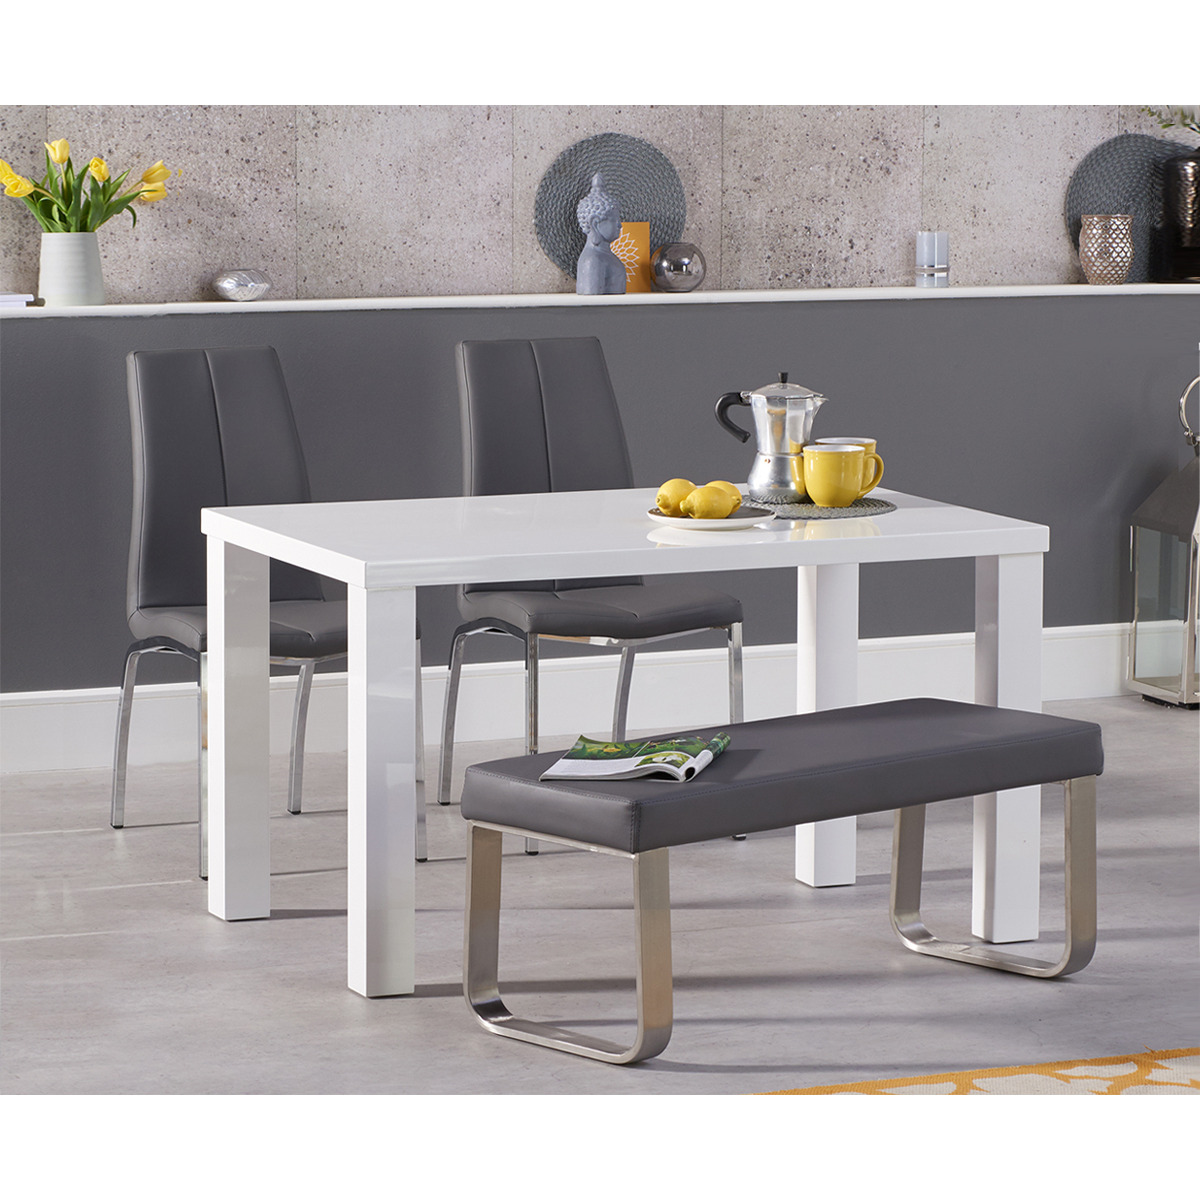 Seattle 120cm White High Gloss Dining Table with 2 White Marco Chairs and 1 Austin Grey Bench